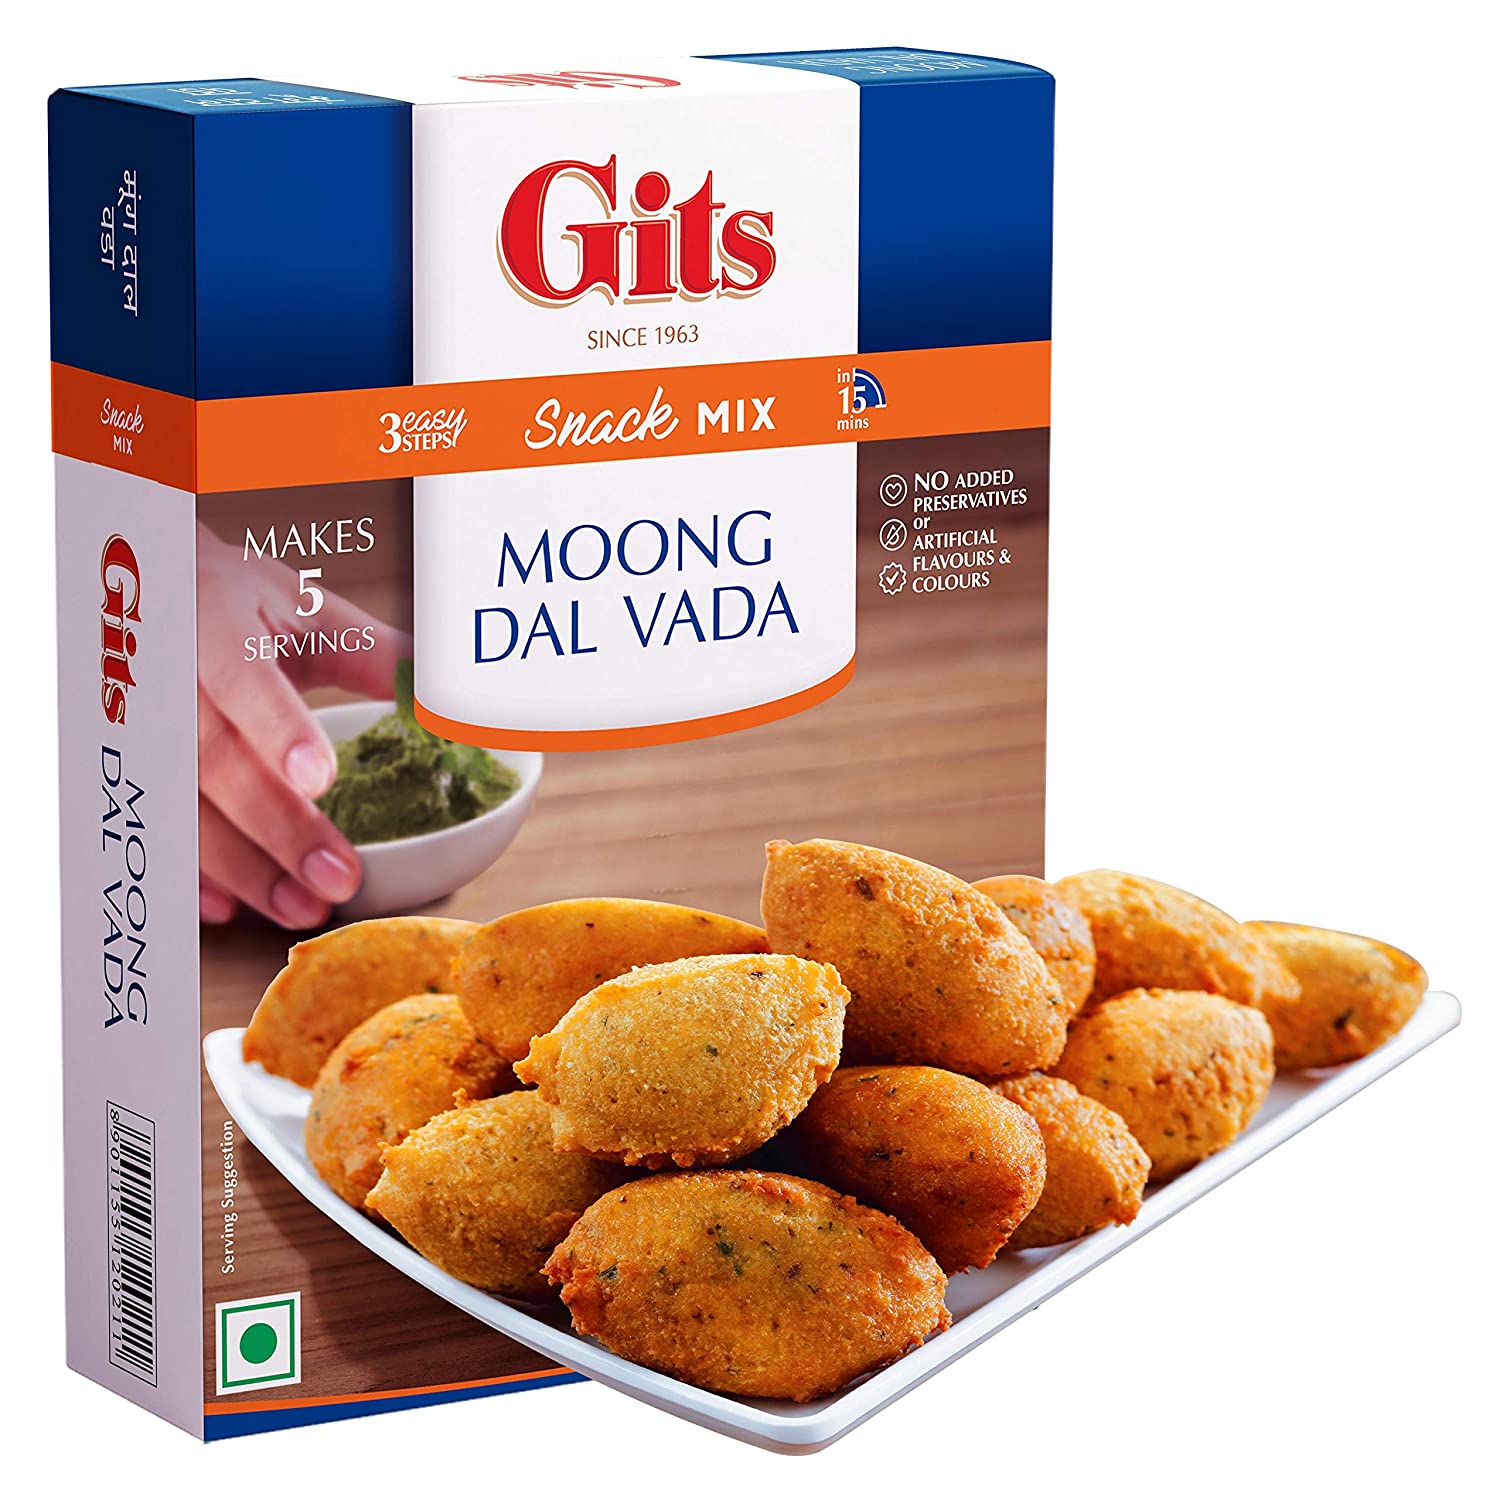 Gits Instant Moong Dal Vada Snack Mix, 200g